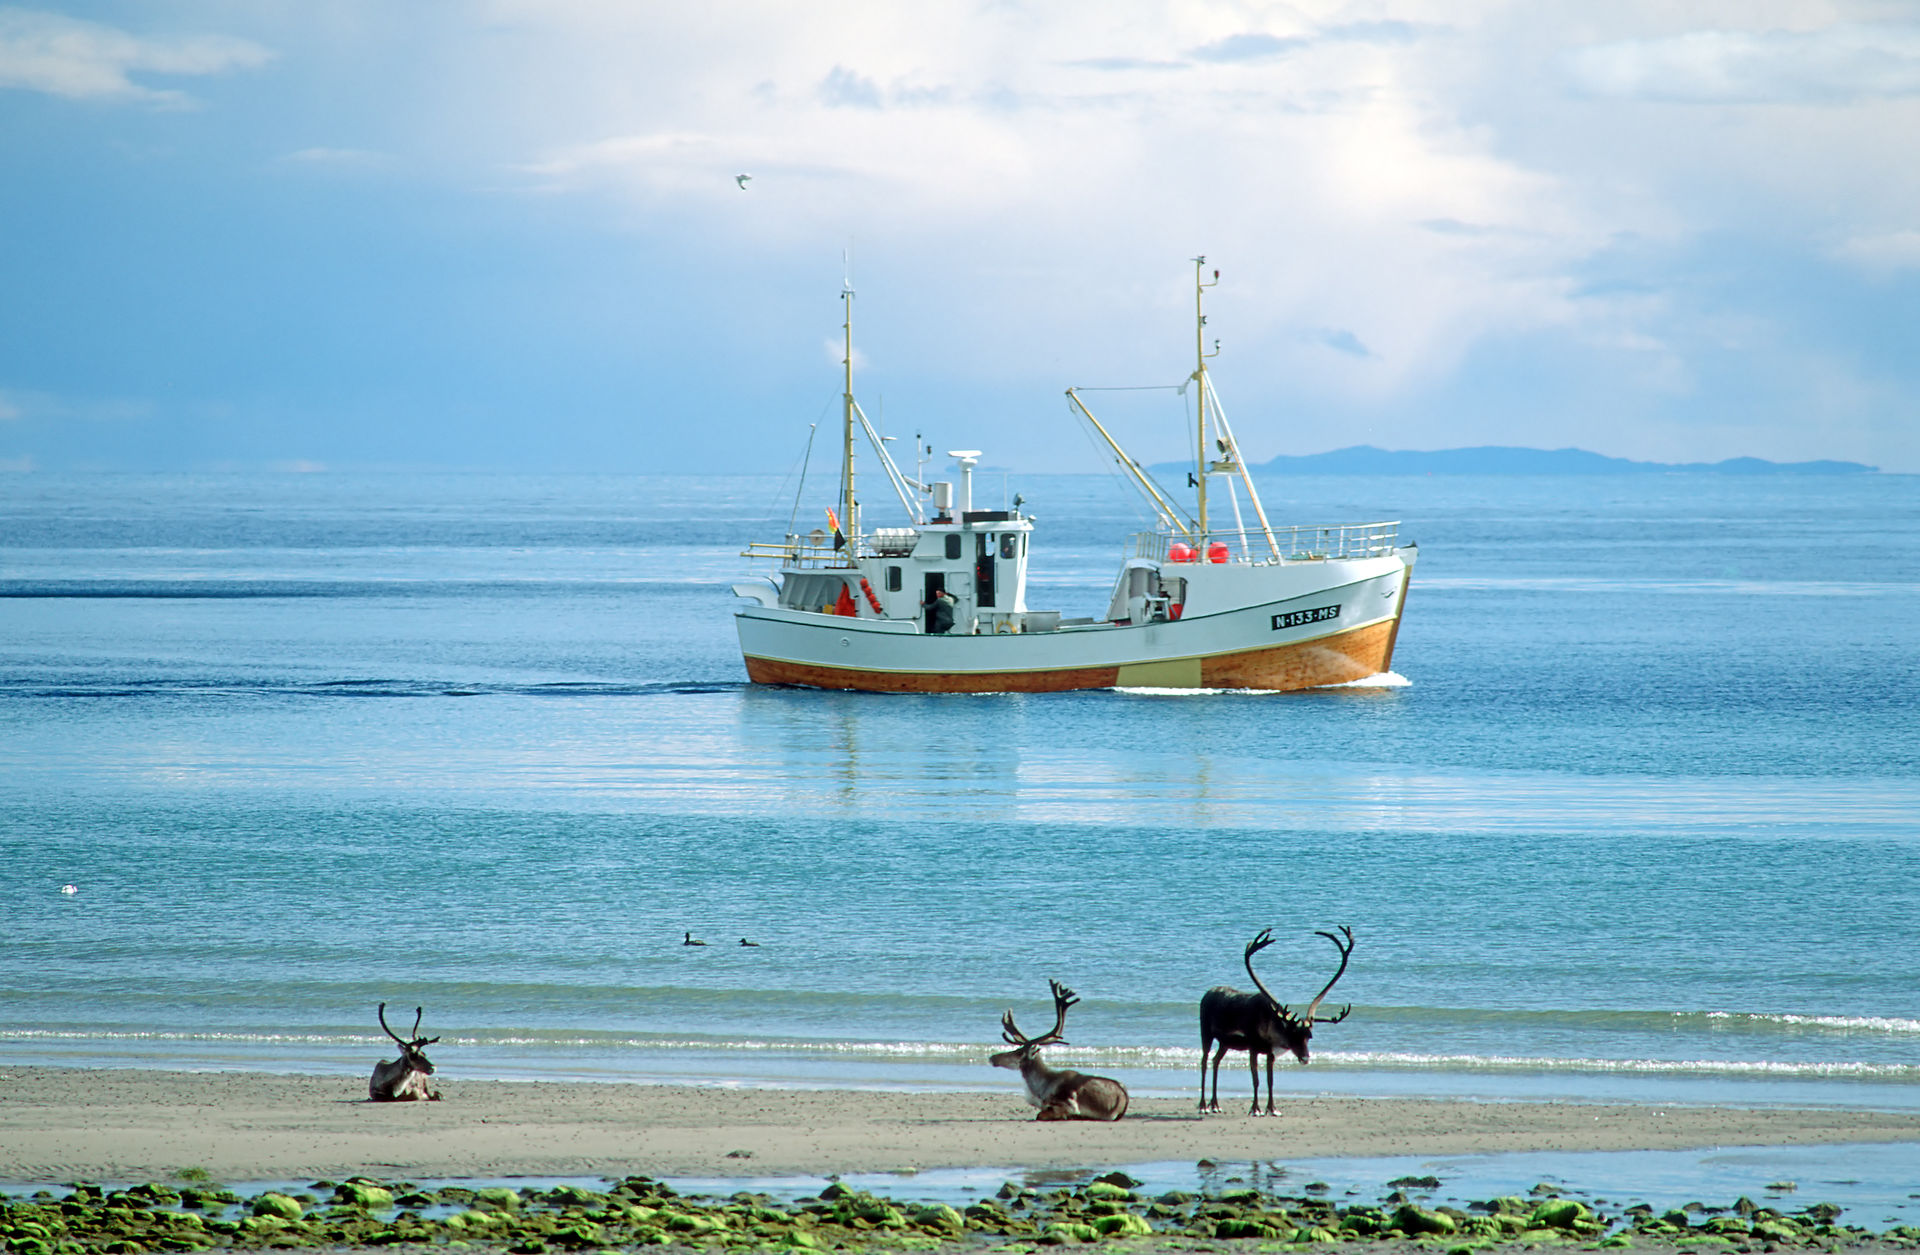 Both reindeer and fishing are part of the Varanger Summer © Bjarne Riesto riesto.no /www.nordnorge.com